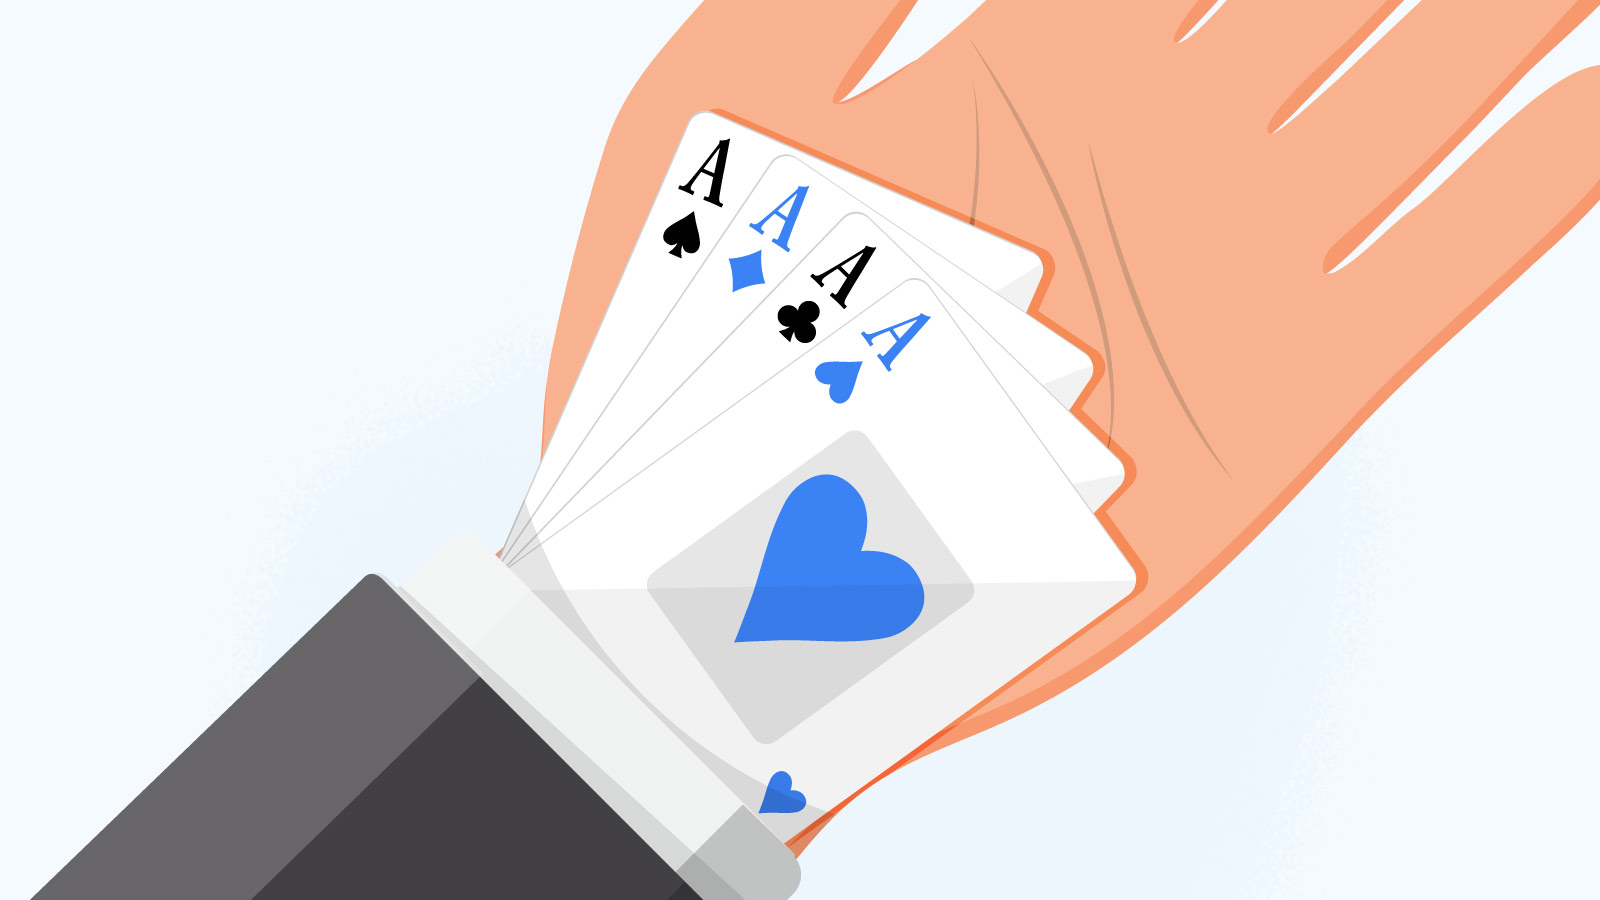 Card counting and other cheating strategies